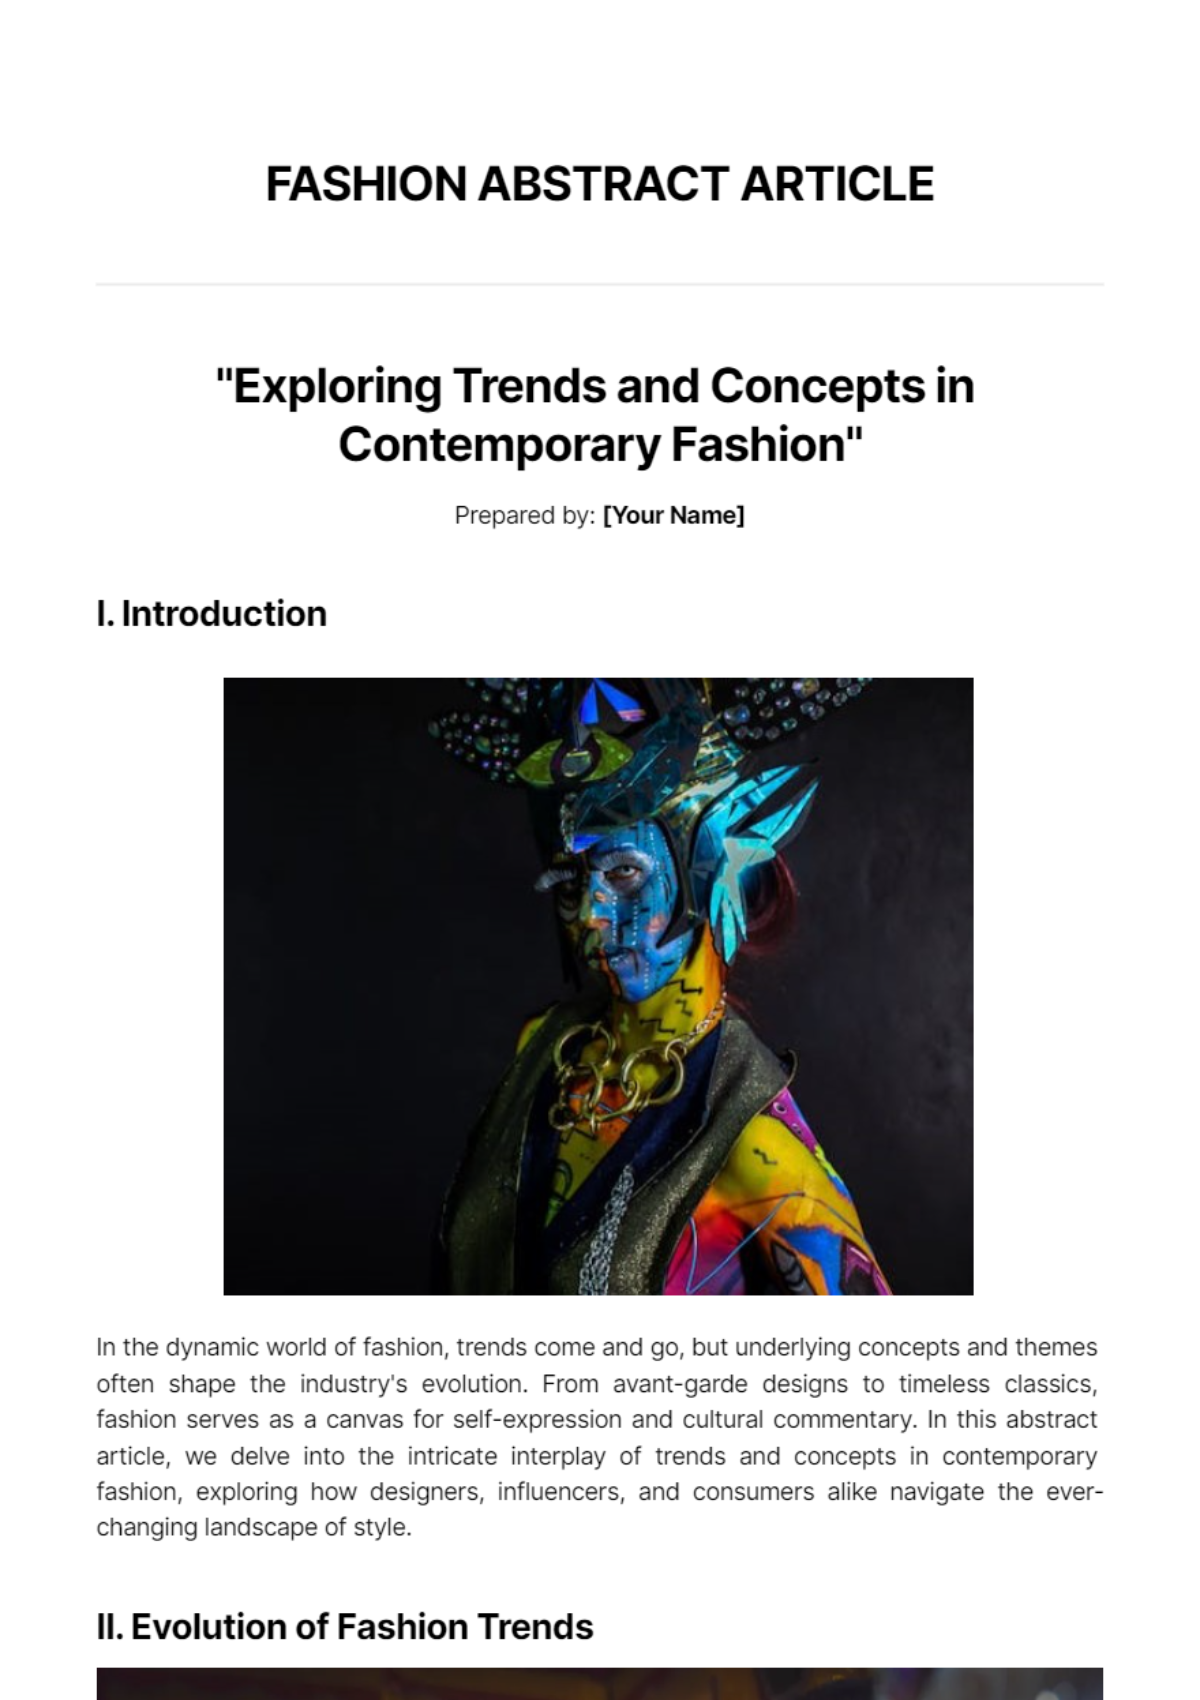 Free Fashion Abstract Article Template